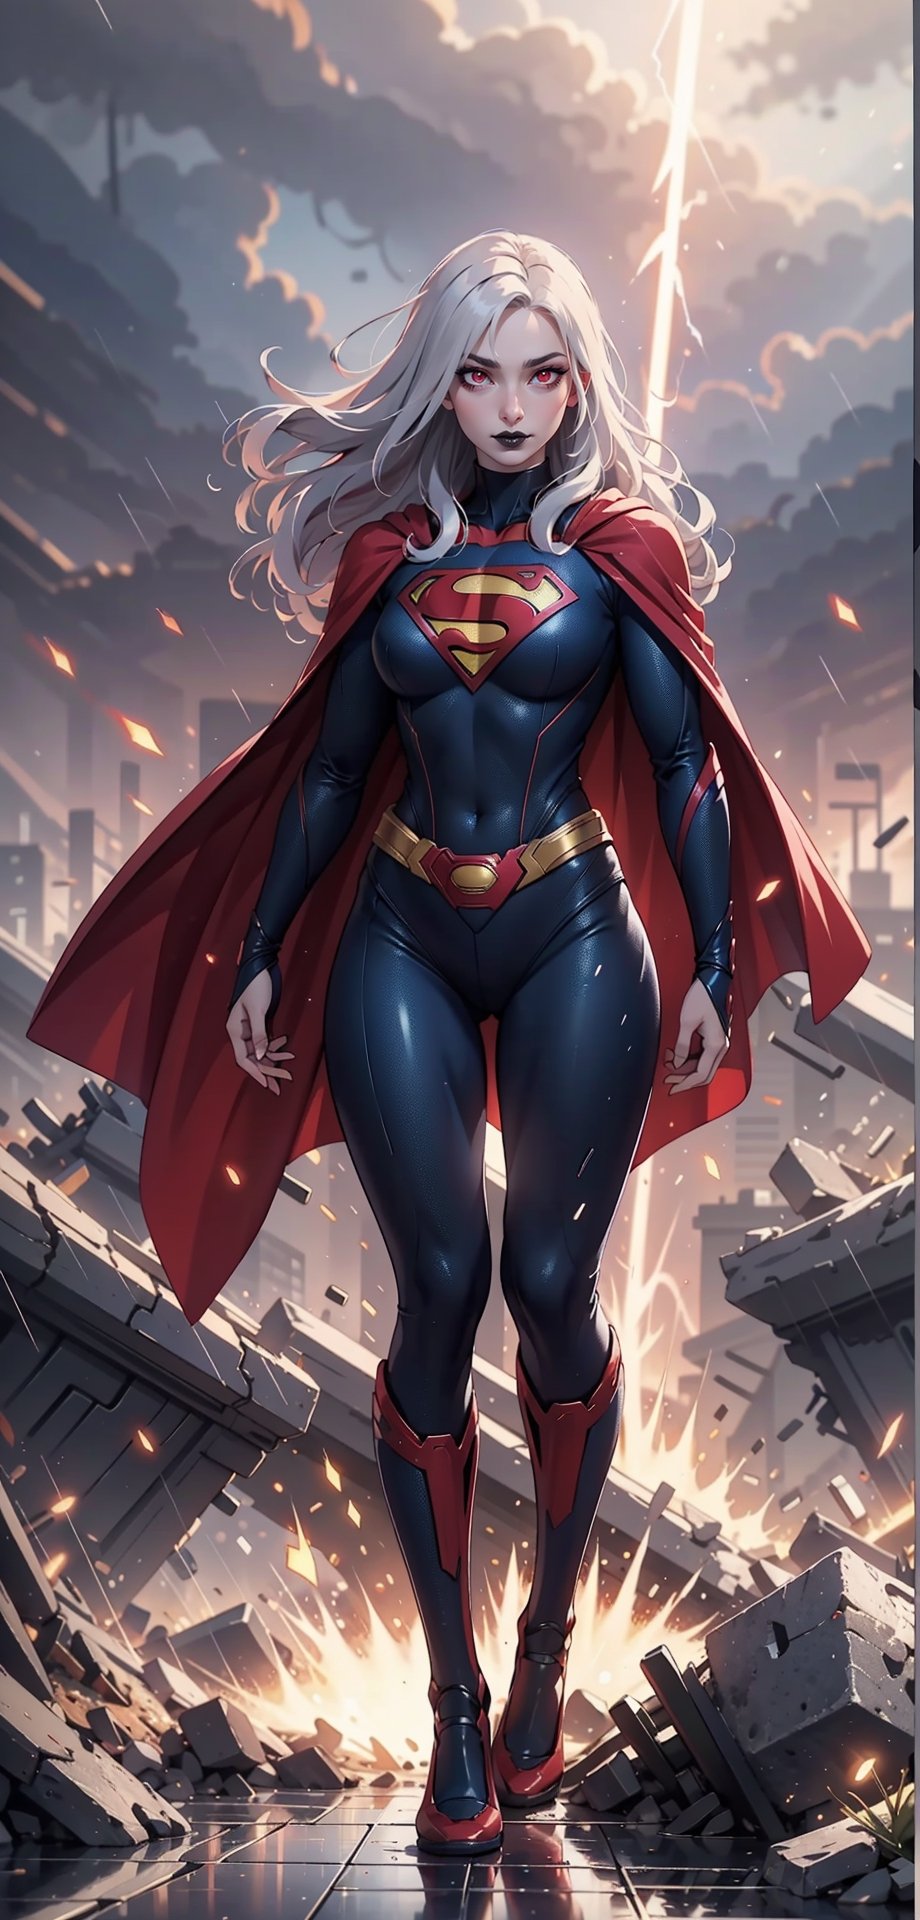 One super female,in superman outfit, red_eyes, glowing eyes:1.4, white hair:1.3, extreme long hair, straight_hair, run down hair, supergirl suit, serious look, masterpiece, best quality, ultra detailed, (detailed background), perfect shading, high contrast, best illumination, extremely detailed, ray tracing, realistic lighting effects, neon noir illustration, perfect generated hands, ((full-body_portrait)), (black lipstick), black eyeliner, black eye shadow:1.3, pale skin:1.4, black fingernails, black cape, fur cape & long. Background fire-around, rocks, ruins, rain-fire, lightning in the distance.,wearing supergirl_cosplay_outfit